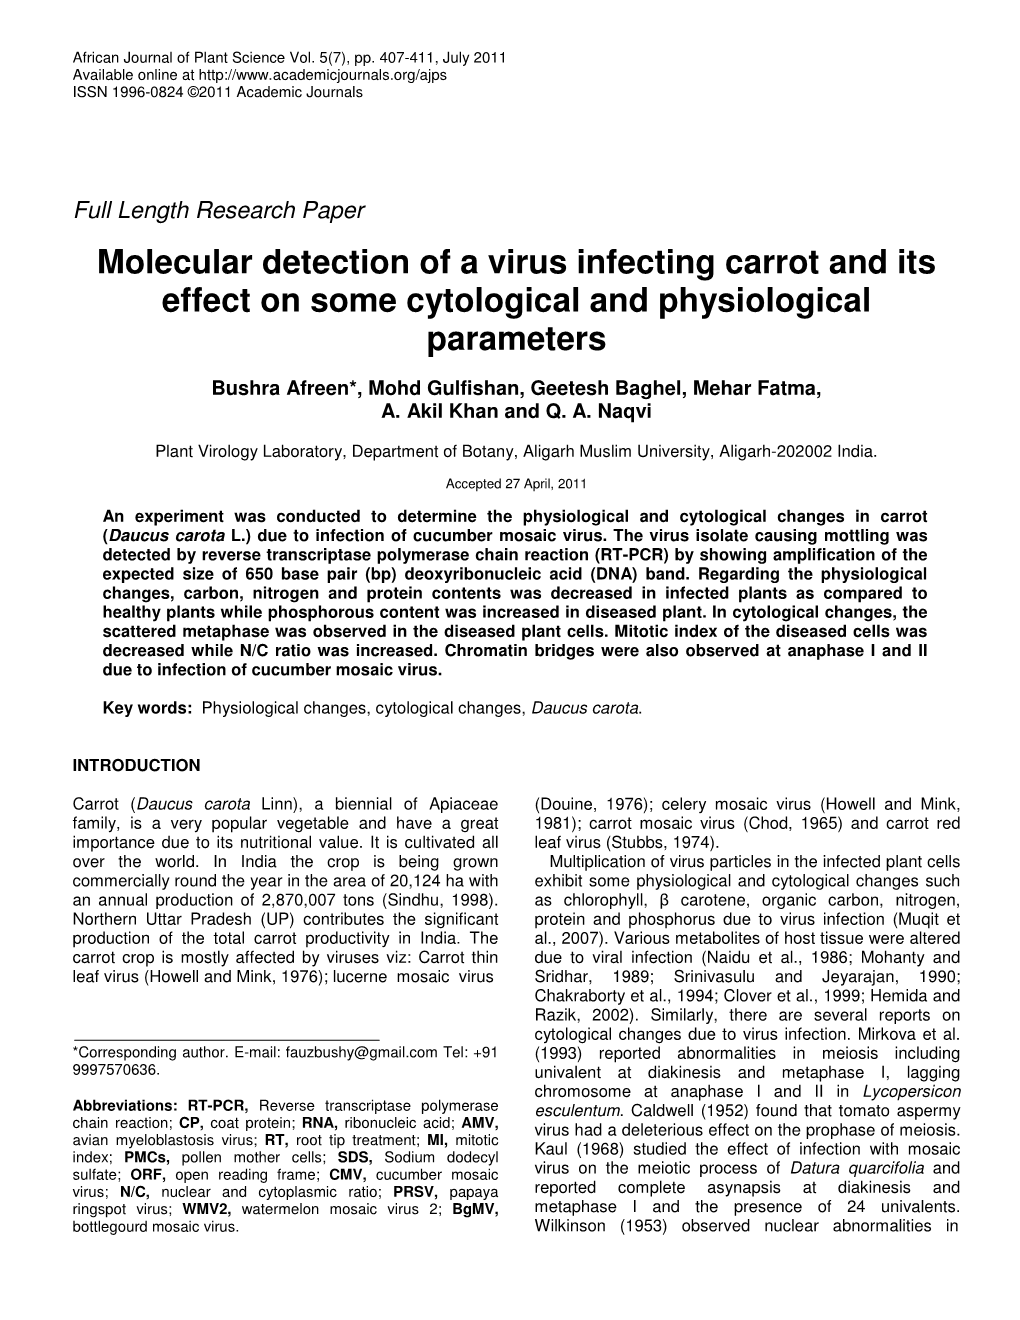 Molecular Detection of a Virus Infecting Carrot and Its Effect on Some Cytological and Physiological Parameters